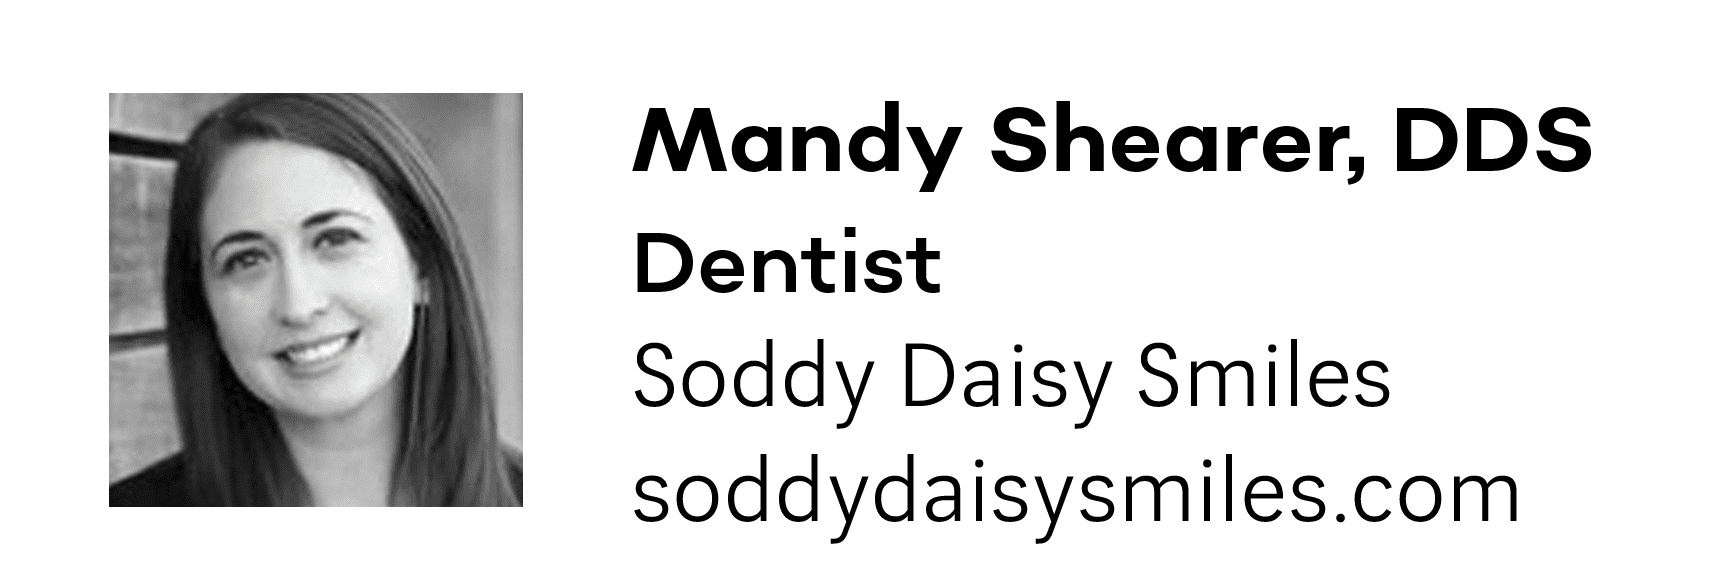 mandy shearer dds dentist at soddy daisy smiles in chattanooga